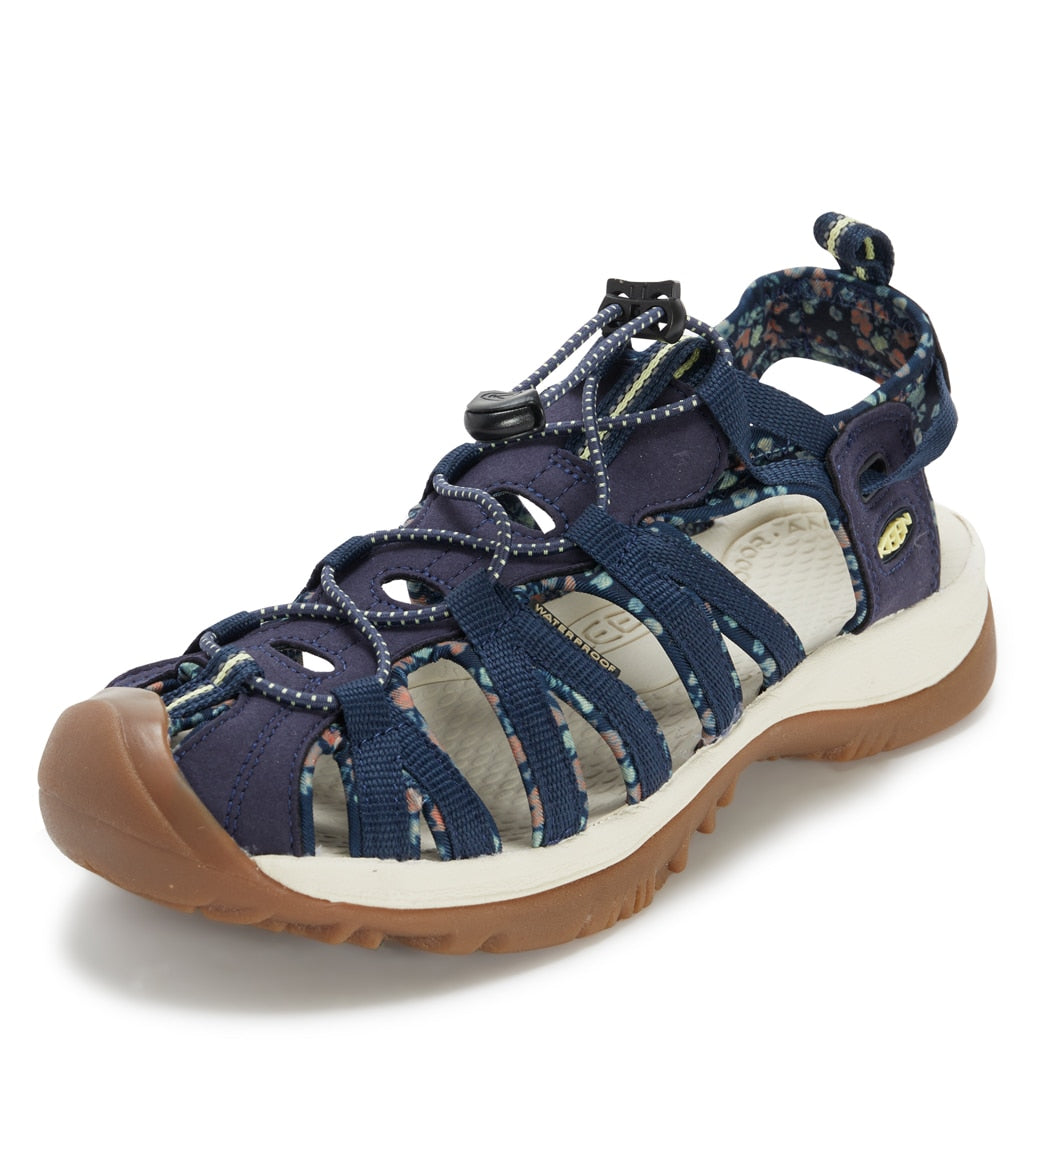 Keen Women's Whisper Water Shoes at SwimOutlet.com